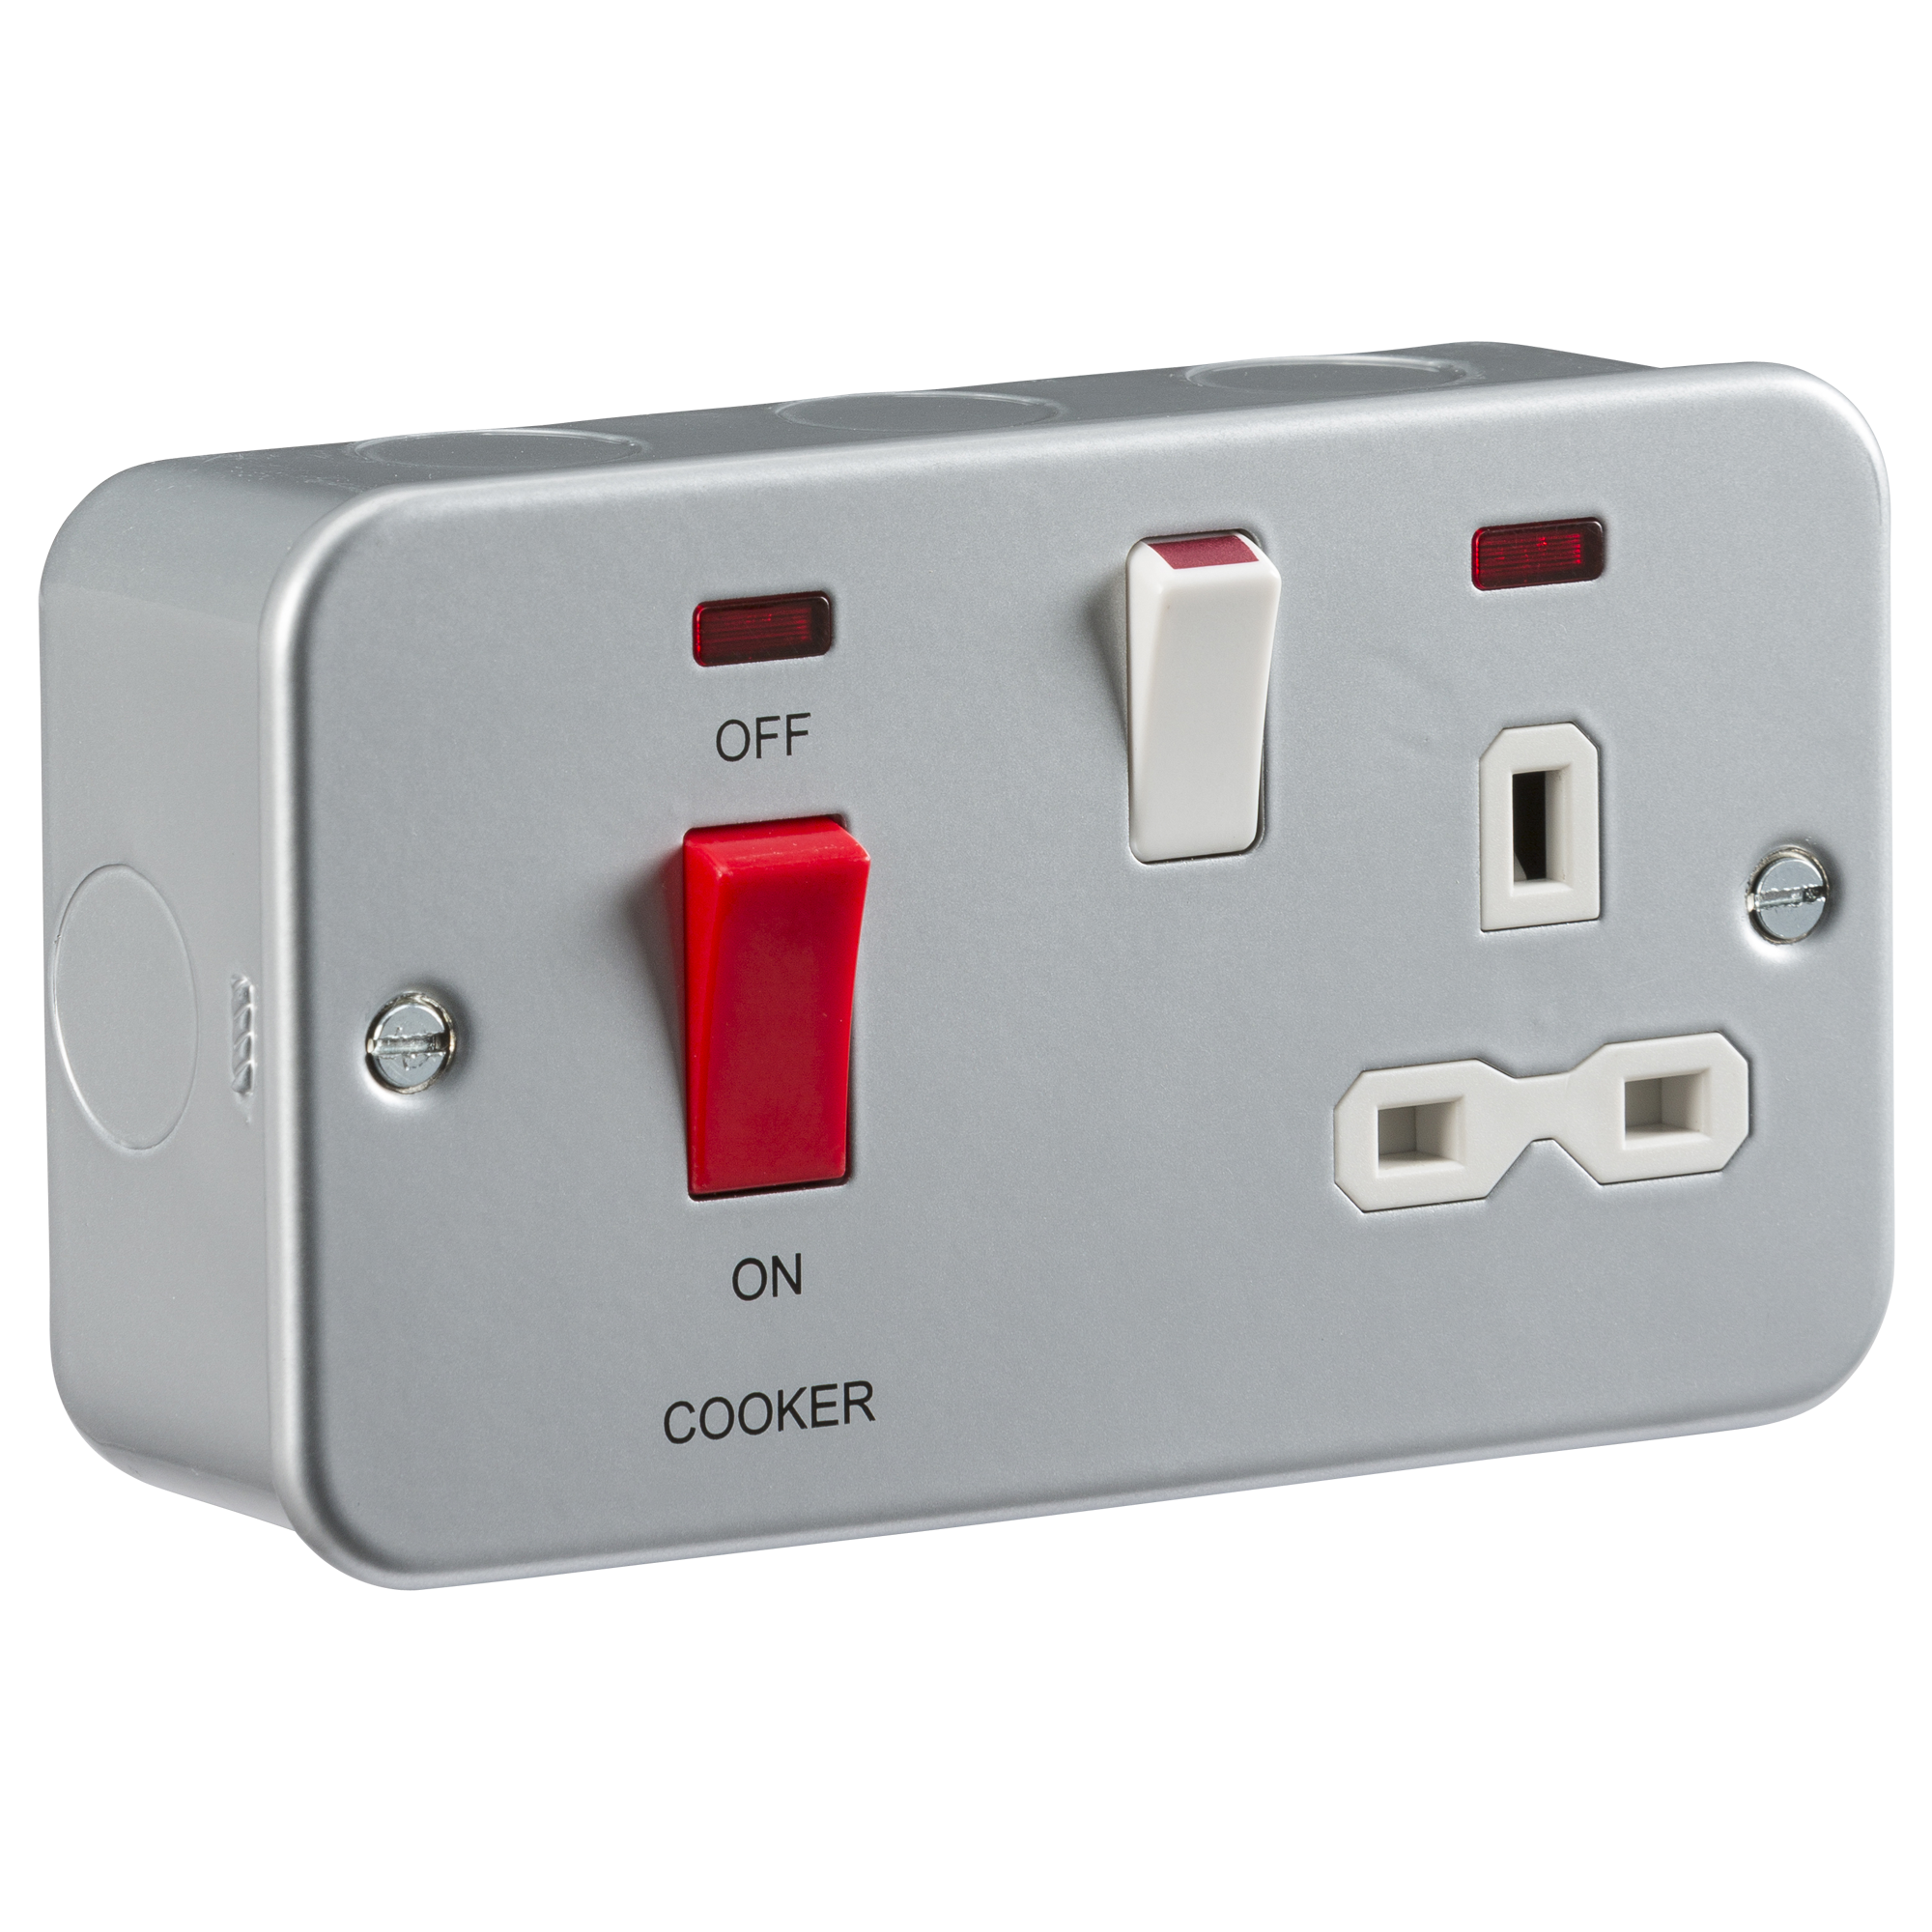 Metal Clad 2G 45A DP Cooker Switch And 13A Switched Socket With Neons - MR8333N 